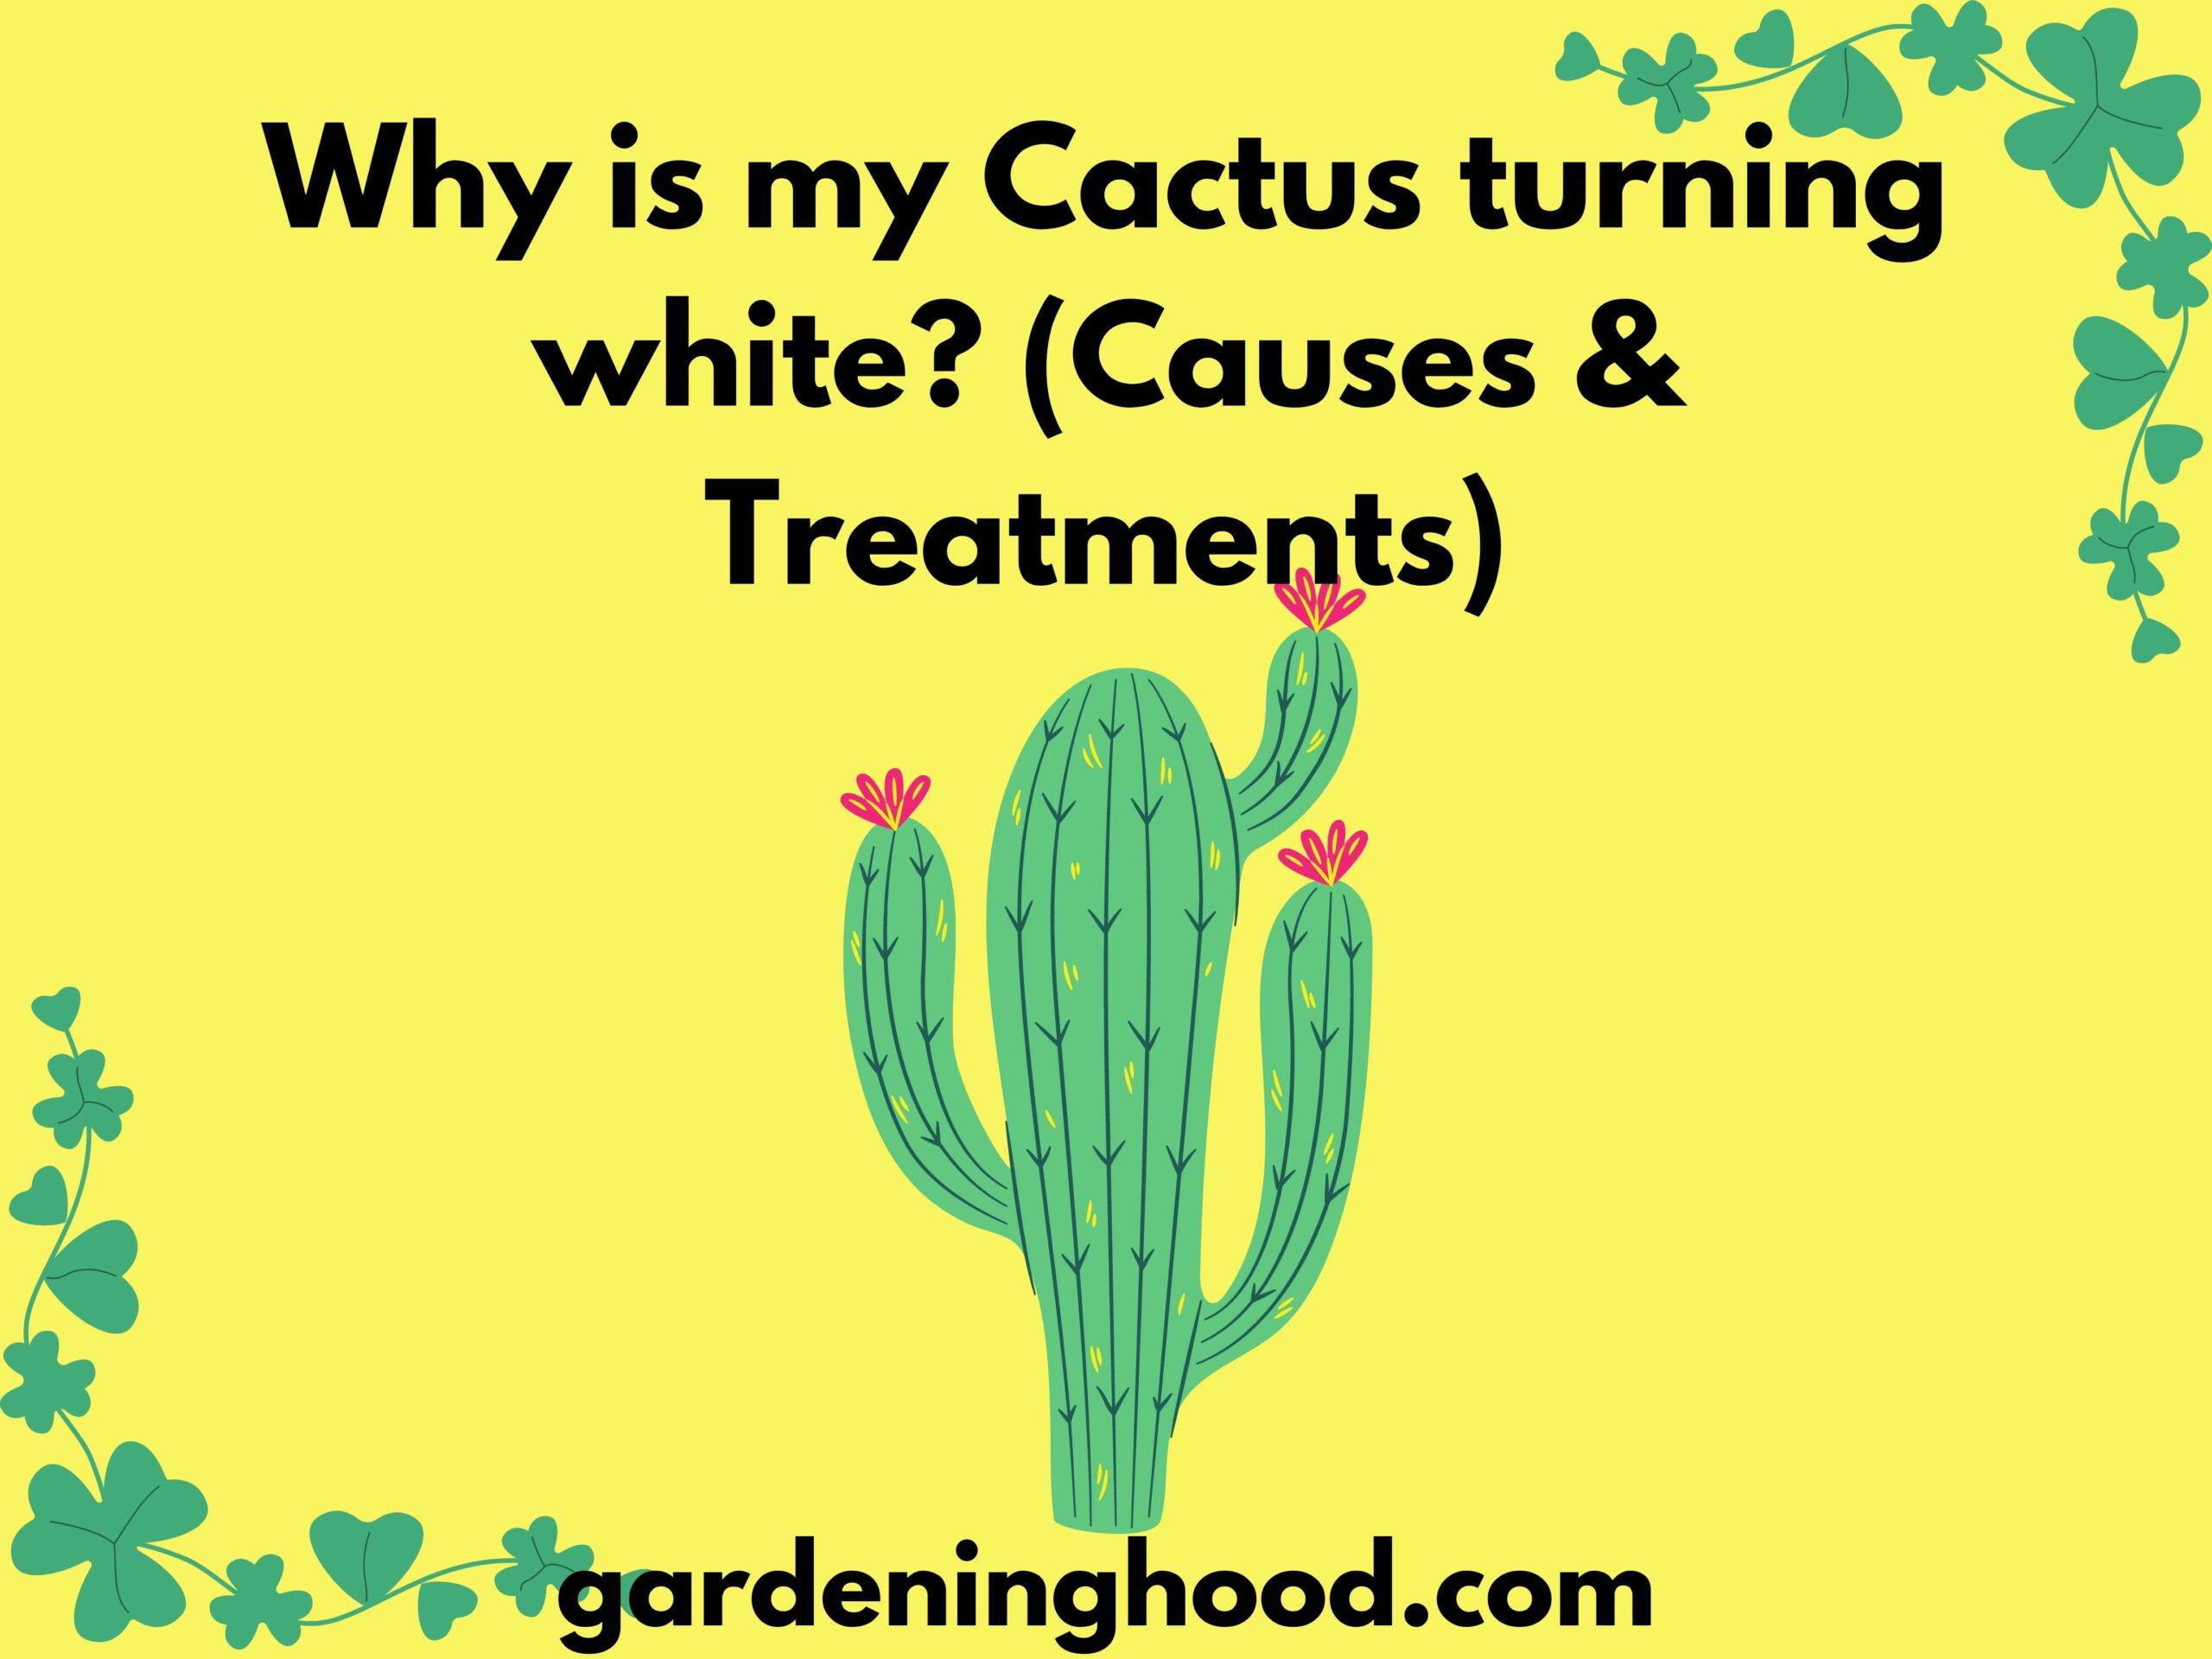 Why is my Cactus turning white? (Causes & Treatments)